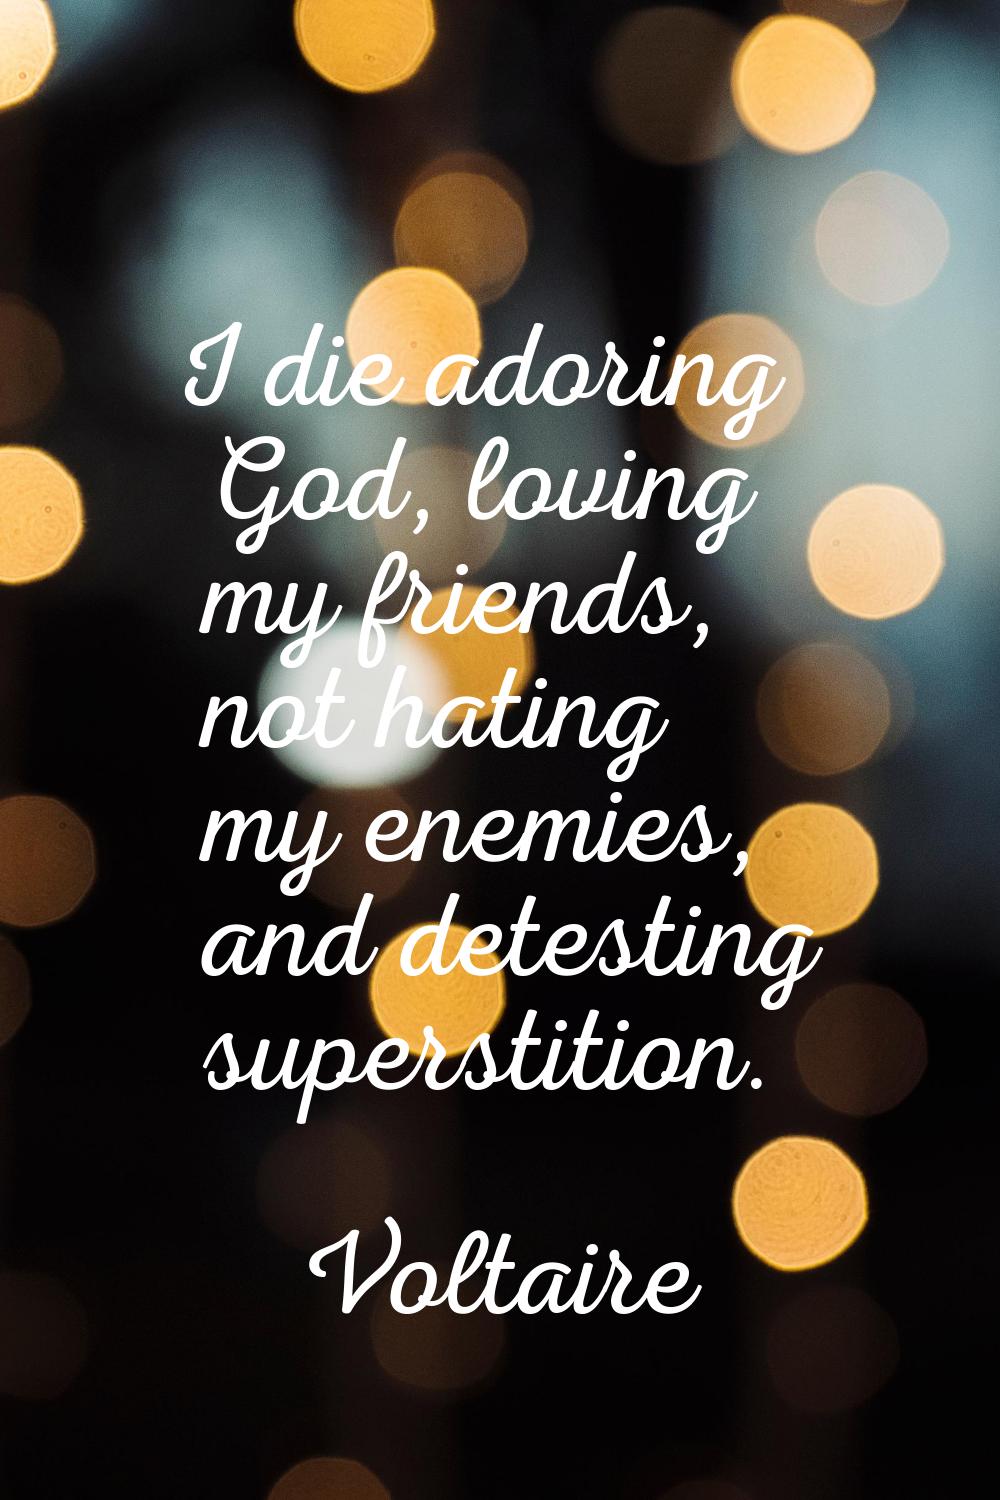 I die adoring God, loving my friends, not hating my enemies, and detesting superstition.